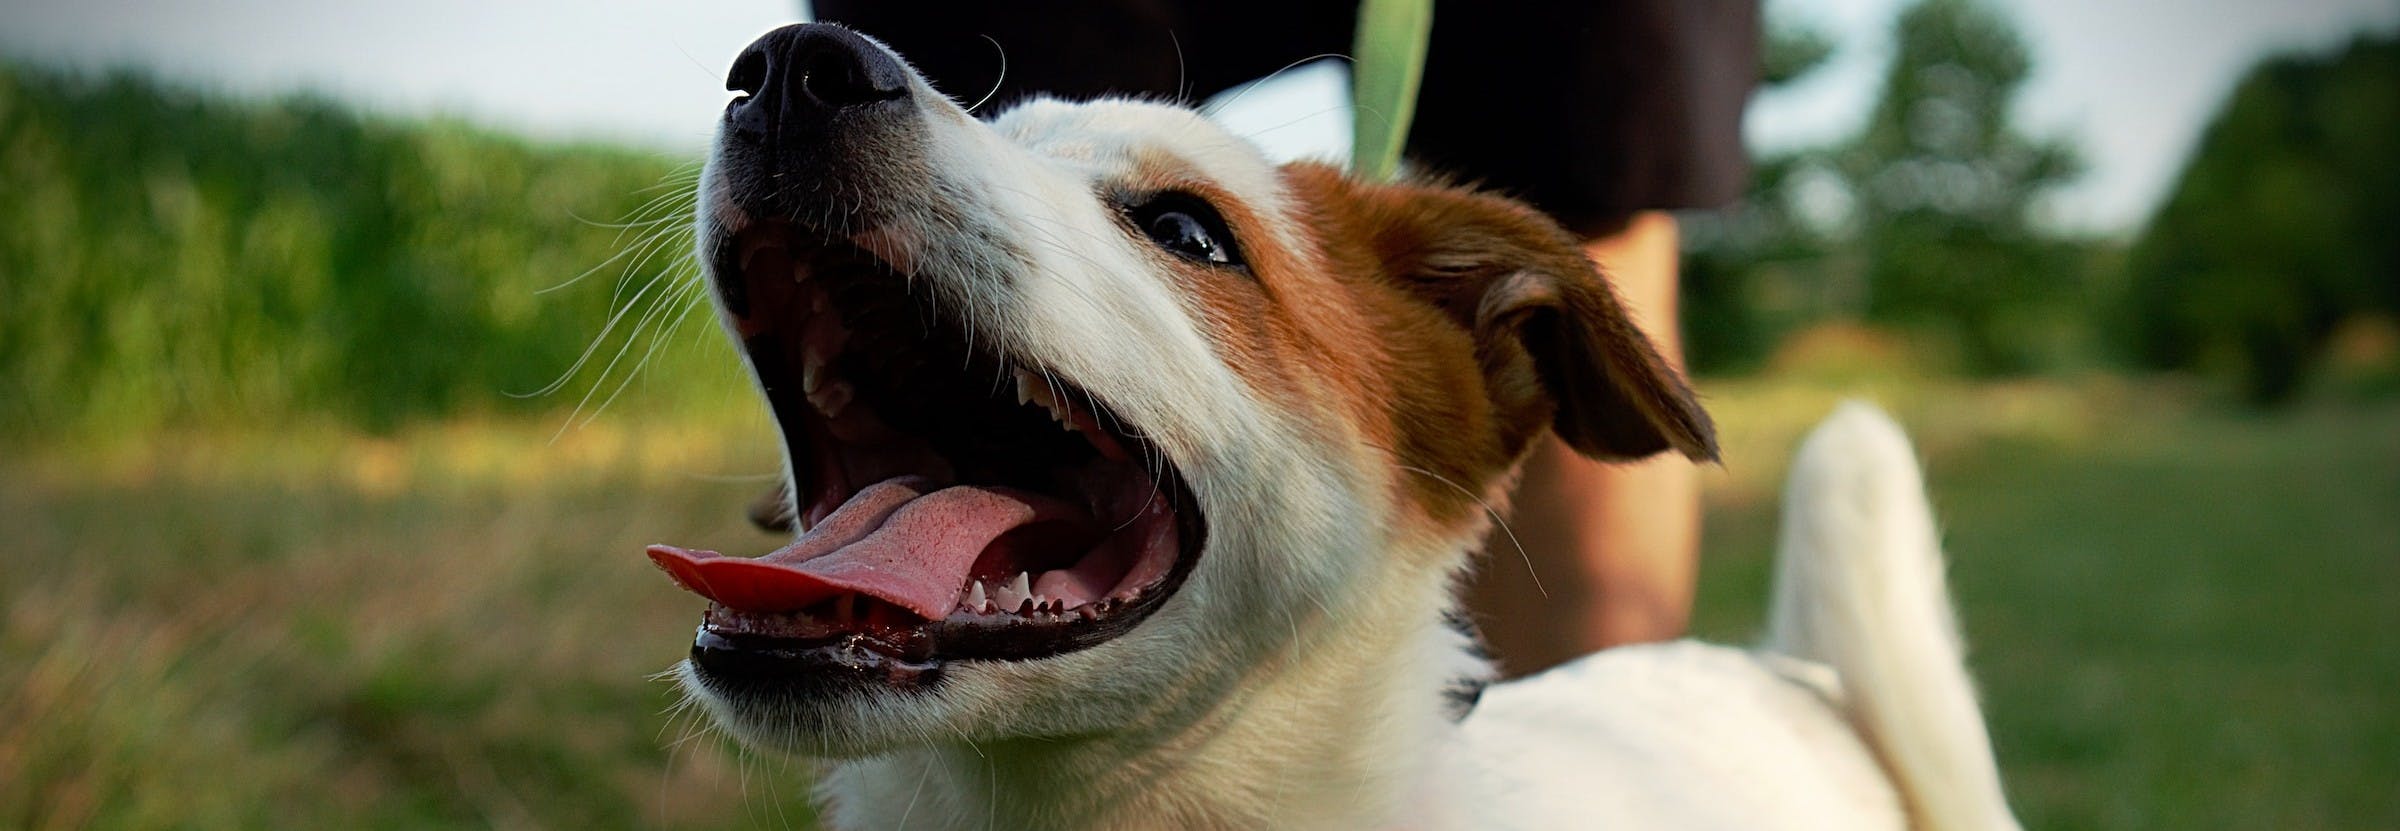 Why Does My Dog Pant So Much? Understanding Normal and Excessive Panting in Dogs